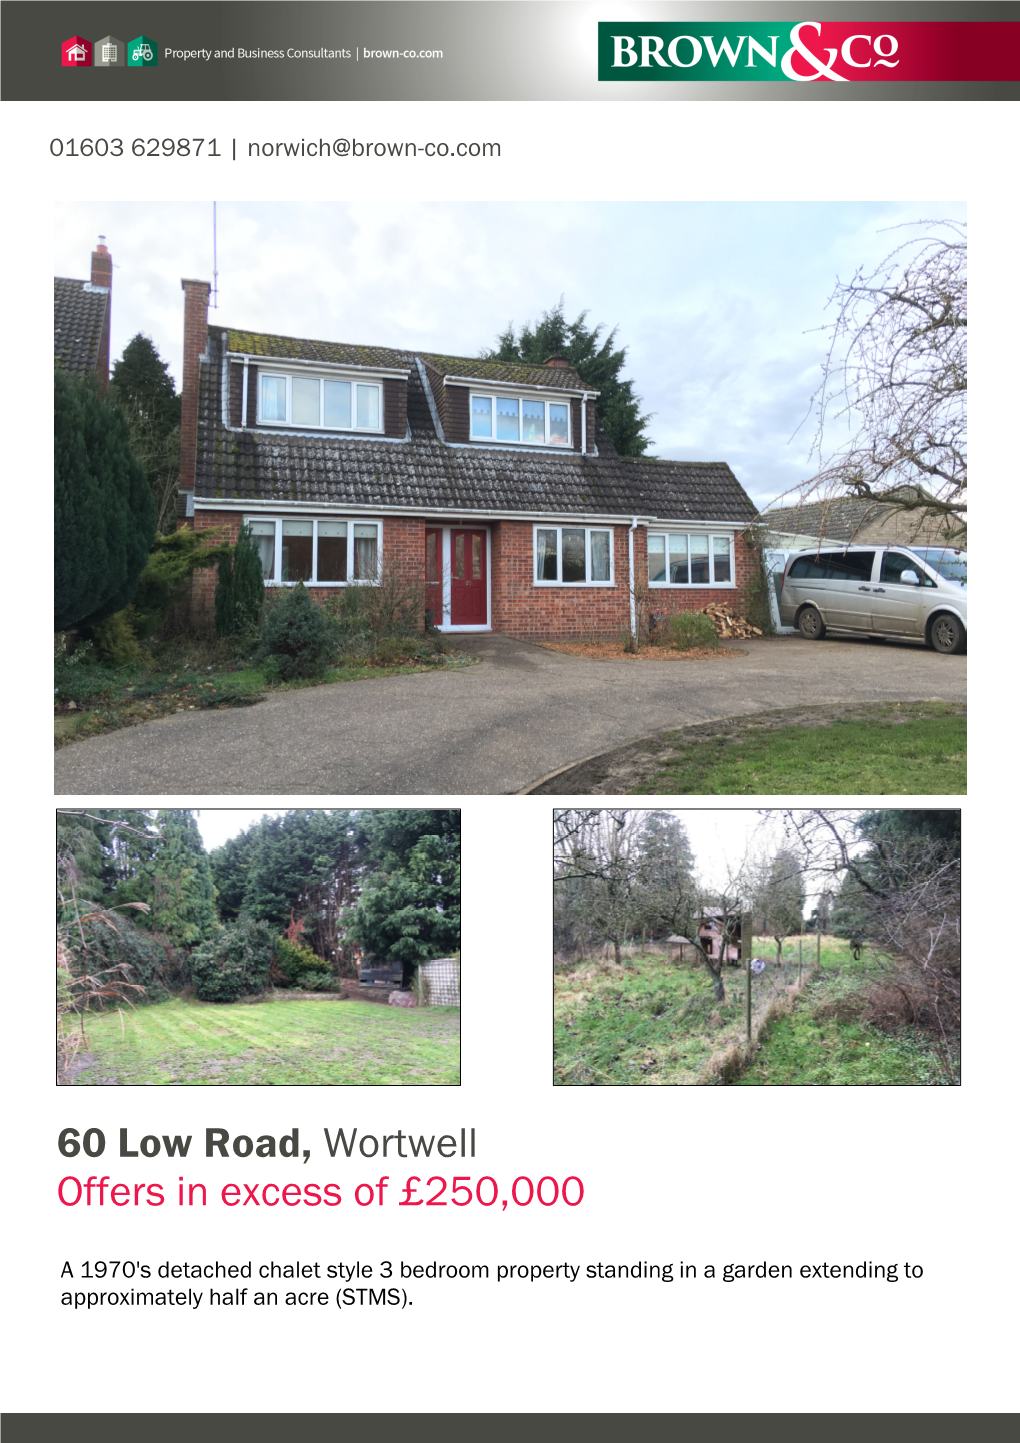 60 Low Road, Wortwell Offers in Excess of £250,000